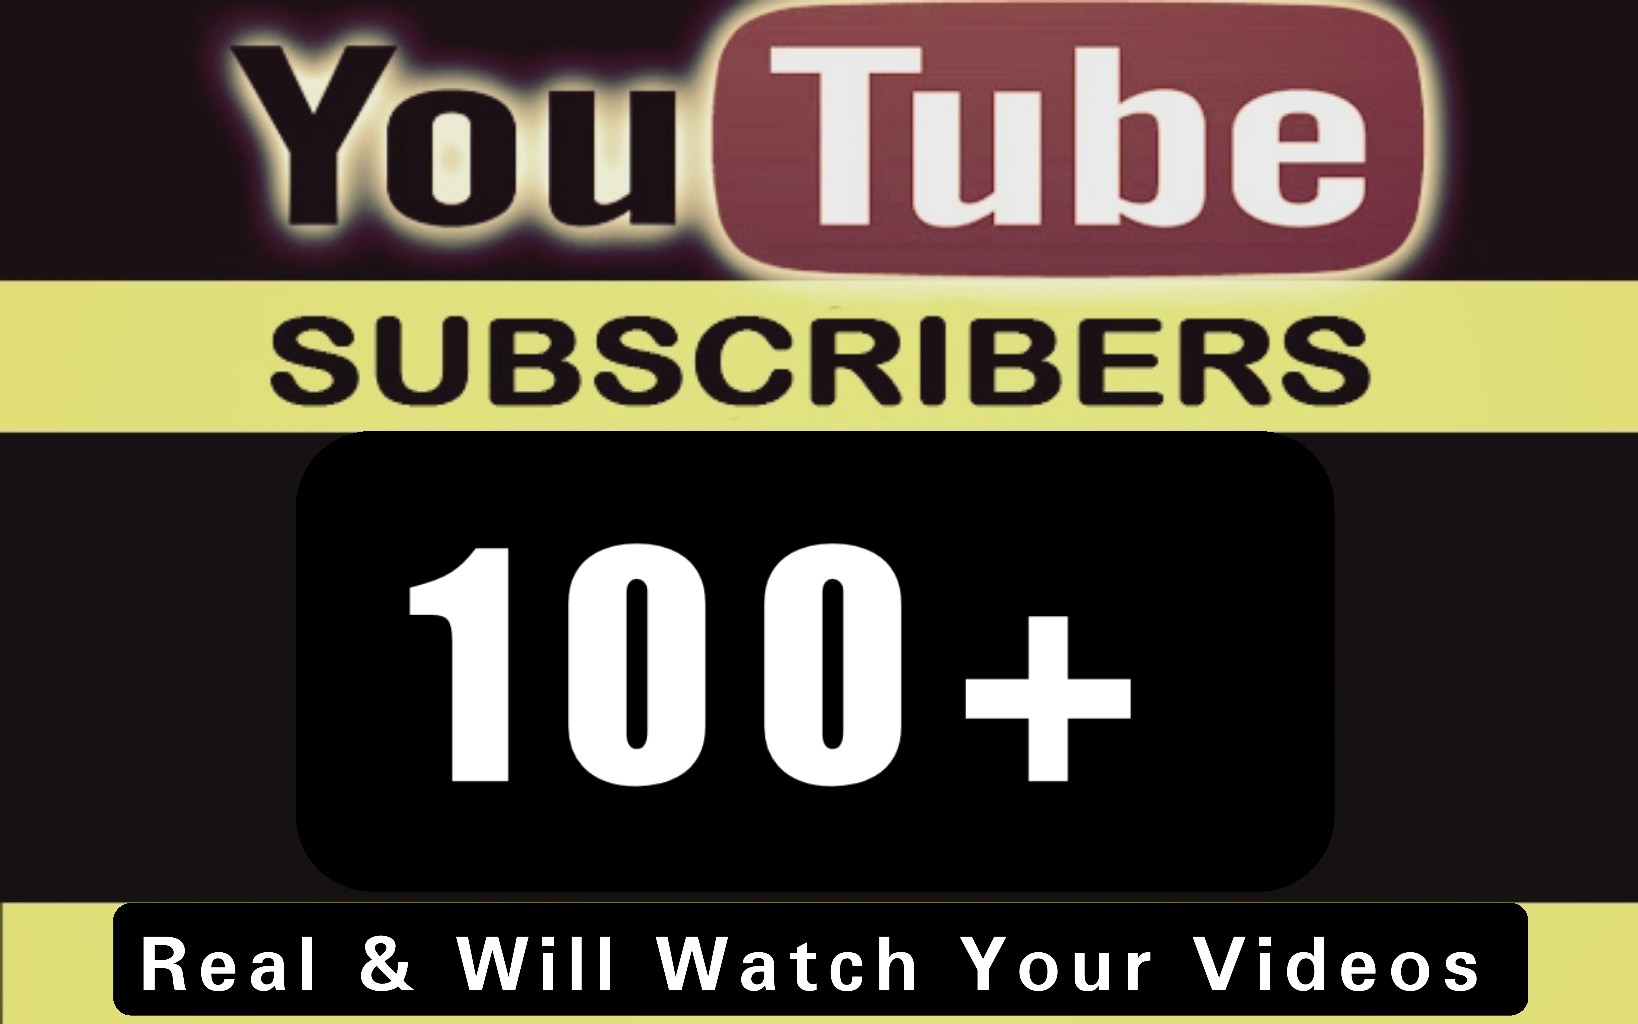 Get 100+ Real YouTube Subscribers, They Will Watch Your Videos After Subscribing